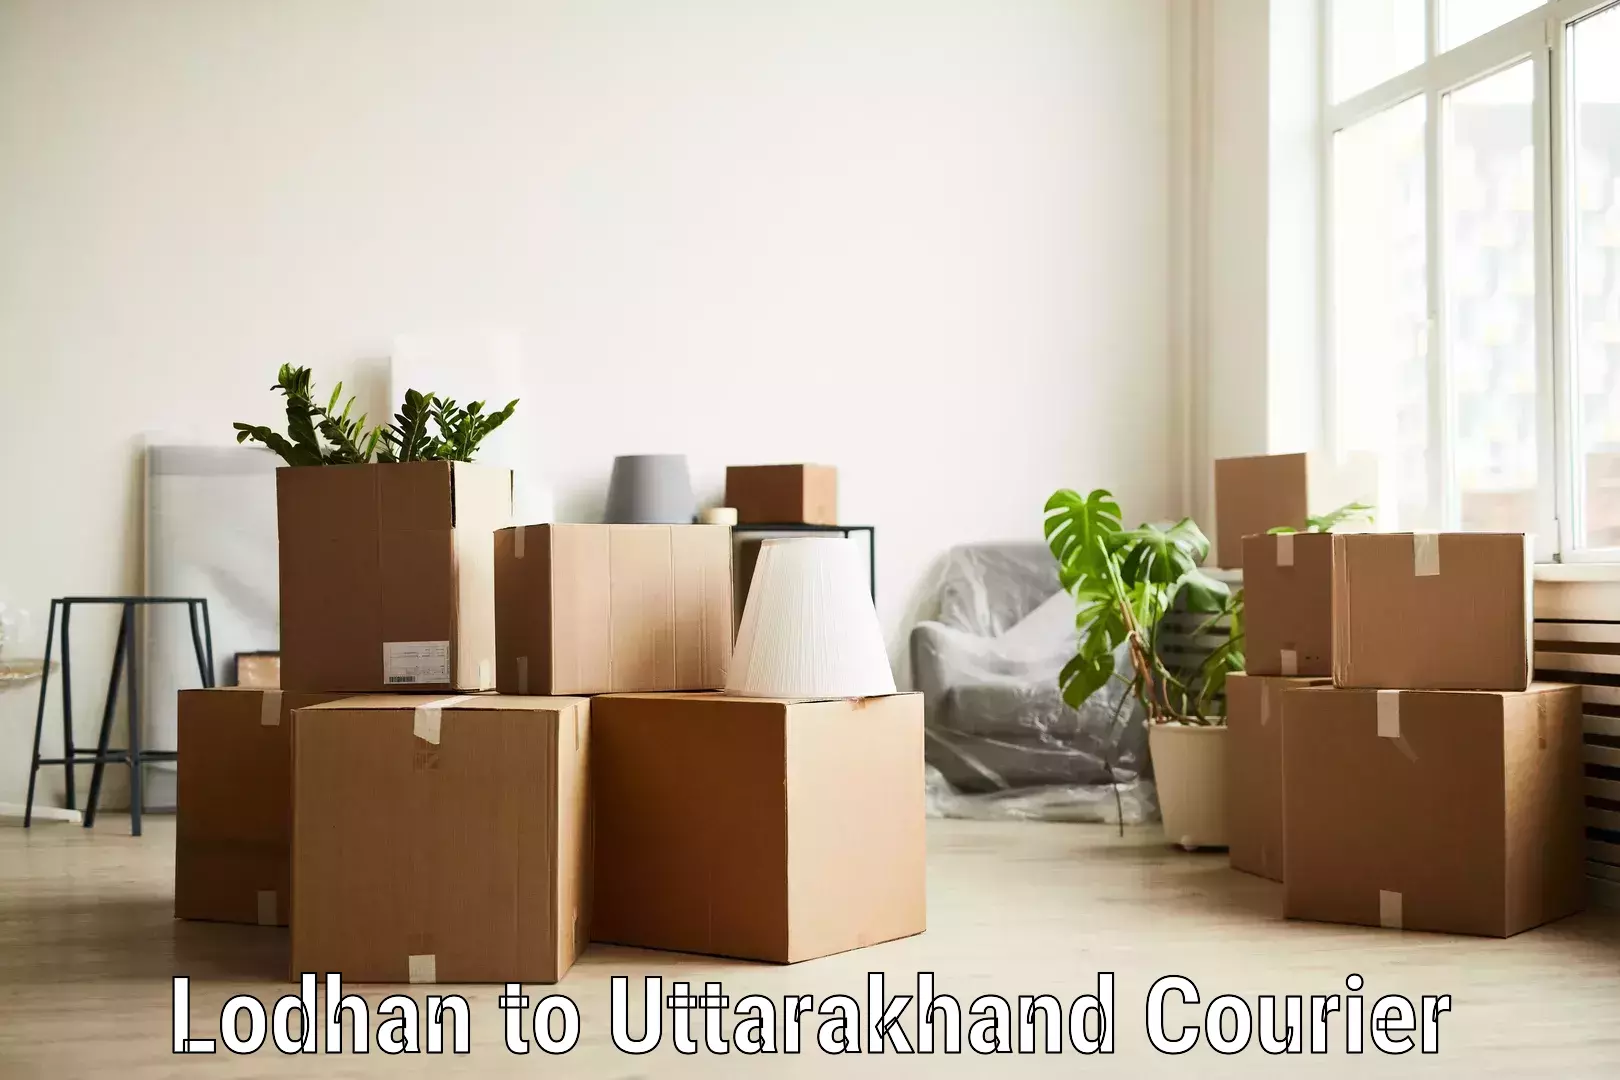 Seamless shipping service Lodhan to Roorkee